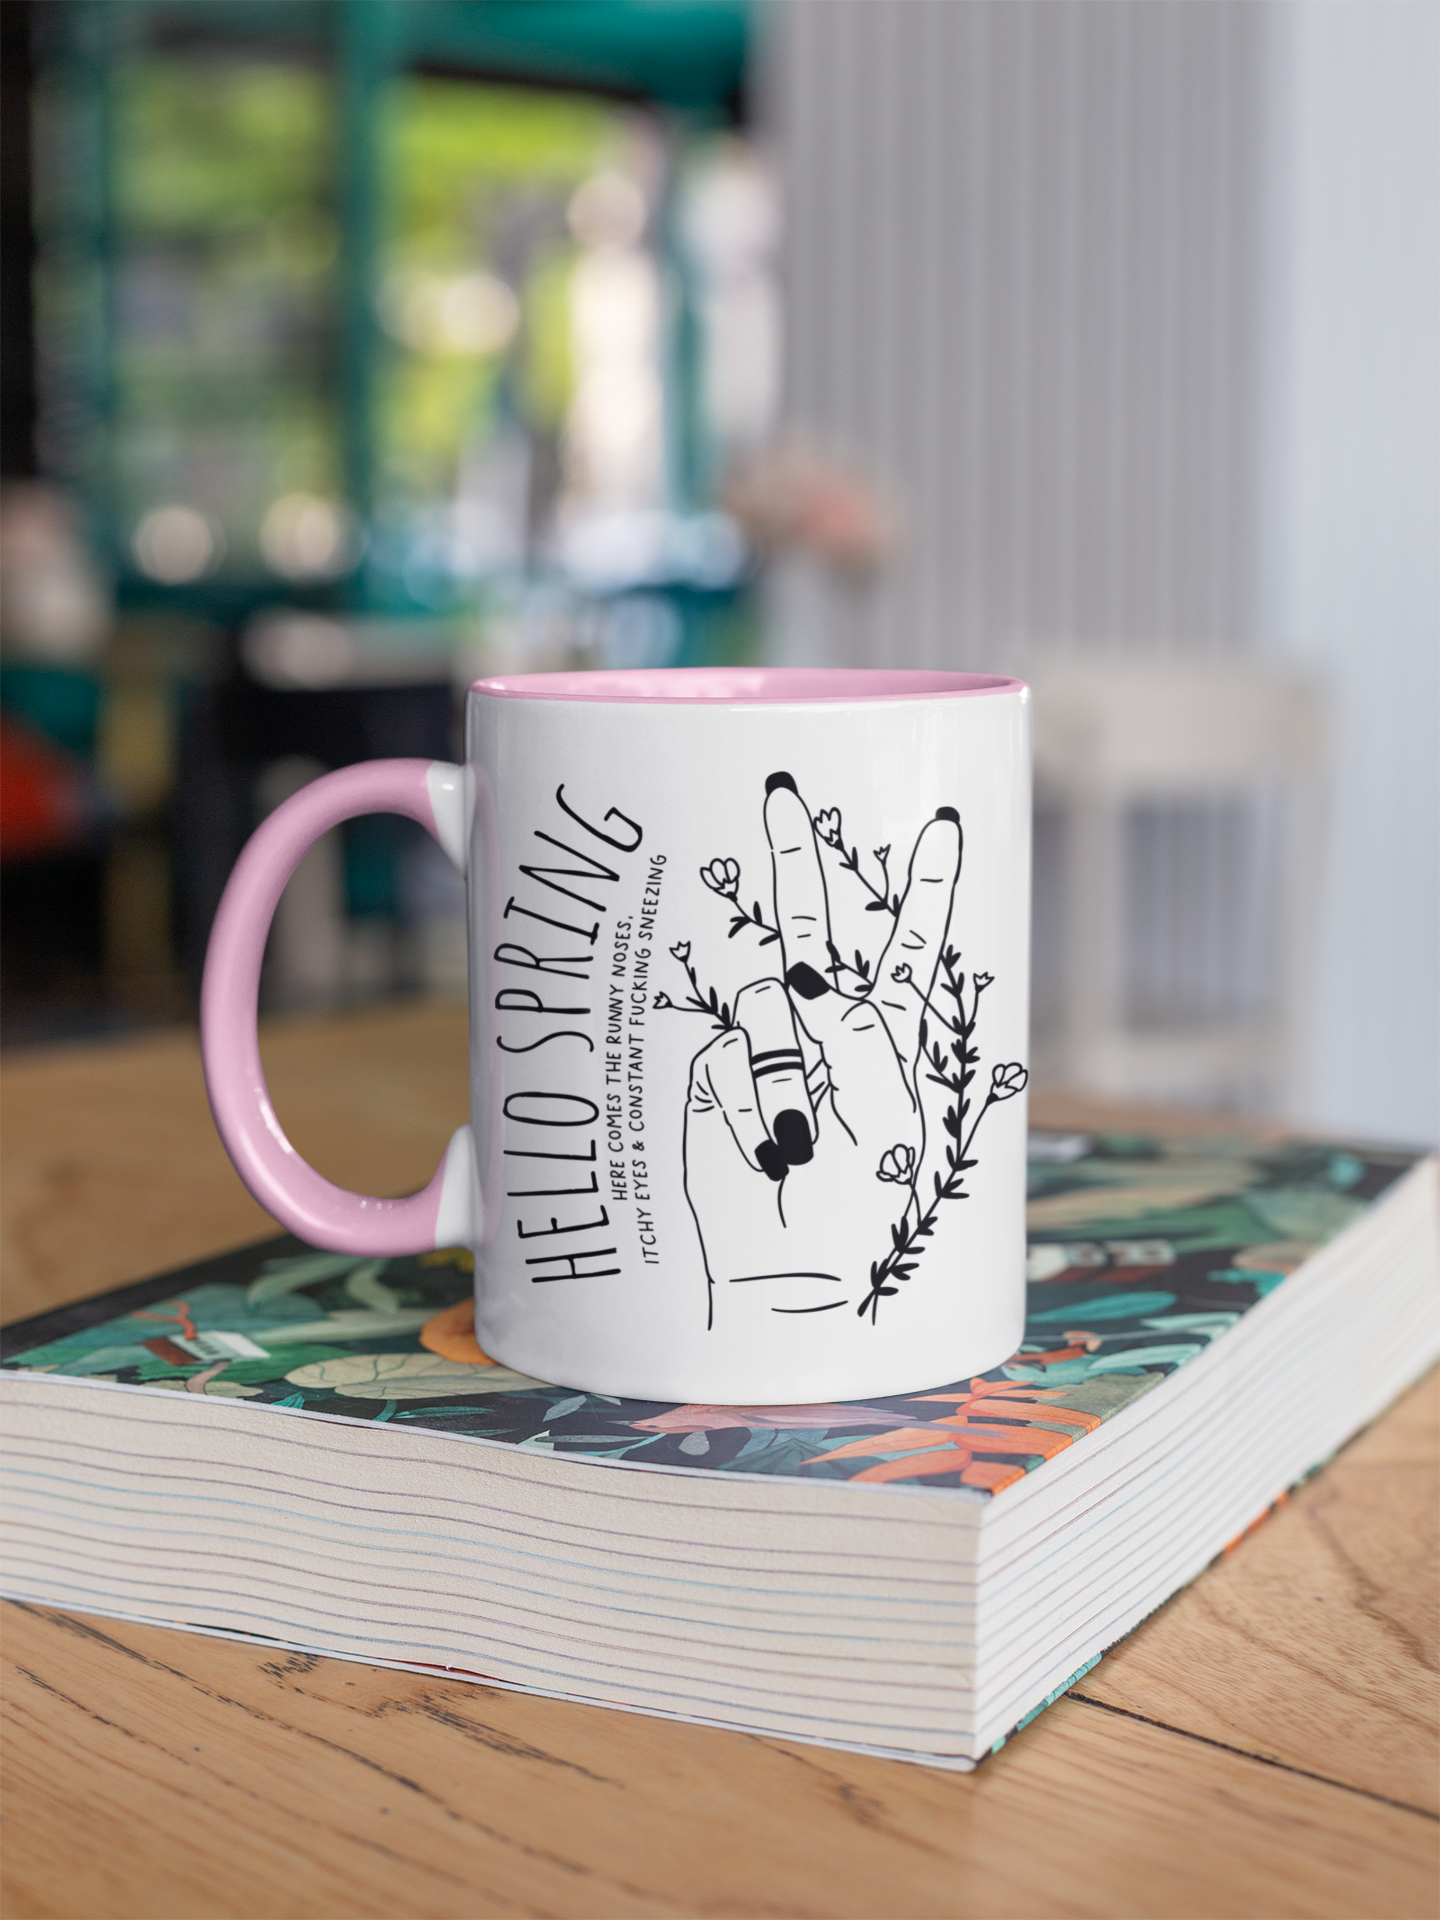 White ceramic mug with a pink handle and a cute boho style drawing of a hand sticking two fingers up, covered in twining flowers. There is a quote to the left which reads ' hello spring - here comes the runny noses, itchy eyes & constant fucking sneezing' printed in black.